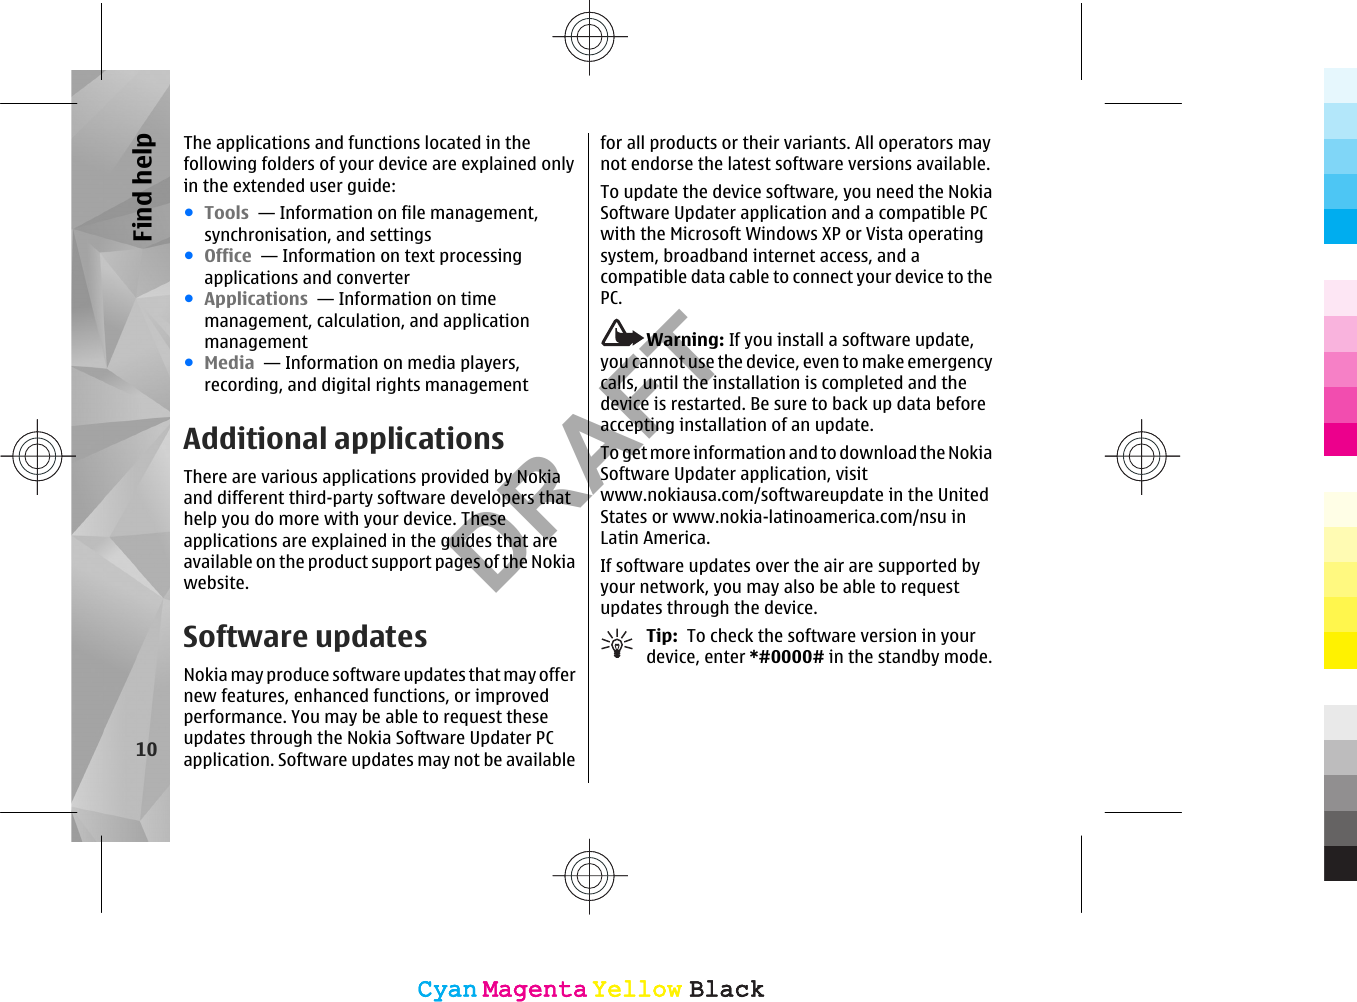 The applications and functions located in thefollowing folders of your device are explained onlyin the extended user guide:●Tools  — Information on file management,synchronisation, and settings●Office  — Information on text processingapplications and converter●Applications  — Information on timemanagement, calculation, and applicationmanagement●Media  — Information on media players,recording, and digital rights managementAdditional applicationsThere are various applications provided by Nokiaand different third-party software developers thathelp you do more with your device. Theseapplications are explained in the guides that areavailable on the product support pages of the Nokiawebsite.Software updatesNokia may produce software updates that may offernew features, enhanced functions, or improvedperformance. You may be able to request theseupdates through the Nokia Software Updater PCapplication. Software updates may not be availablefor all products or their variants. All operators maynot endorse the latest software versions available.To update the device software, you need the NokiaSoftware Updater application and a compatible PCwith the Microsoft Windows XP or Vista operatingsystem, broadband internet access, and acompatible data cable to connect your device to thePC.Warning: If you install a software update,you cannot use the device, even to make emergencycalls, until the installation is completed and thedevice is restarted. Be sure to back up data beforeaccepting installation of an update.To get more information and to download the NokiaSoftware Updater application, visitwww.nokiausa.com/softwareupdate in the UnitedStates or www.nokia-latinoamerica.com/nsu inLatin America.If software updates over the air are supported byyour network, you may also be able to requestupdates through the device.Tip:  To check the software version in yourdevice, enter *#0000# in the standby mode.10Find helpCyanCyanMagentaMagentaYellowYellowBlackBlackCyanCyanMagentaMagentaYellowYellowBlackBlackDRAFT